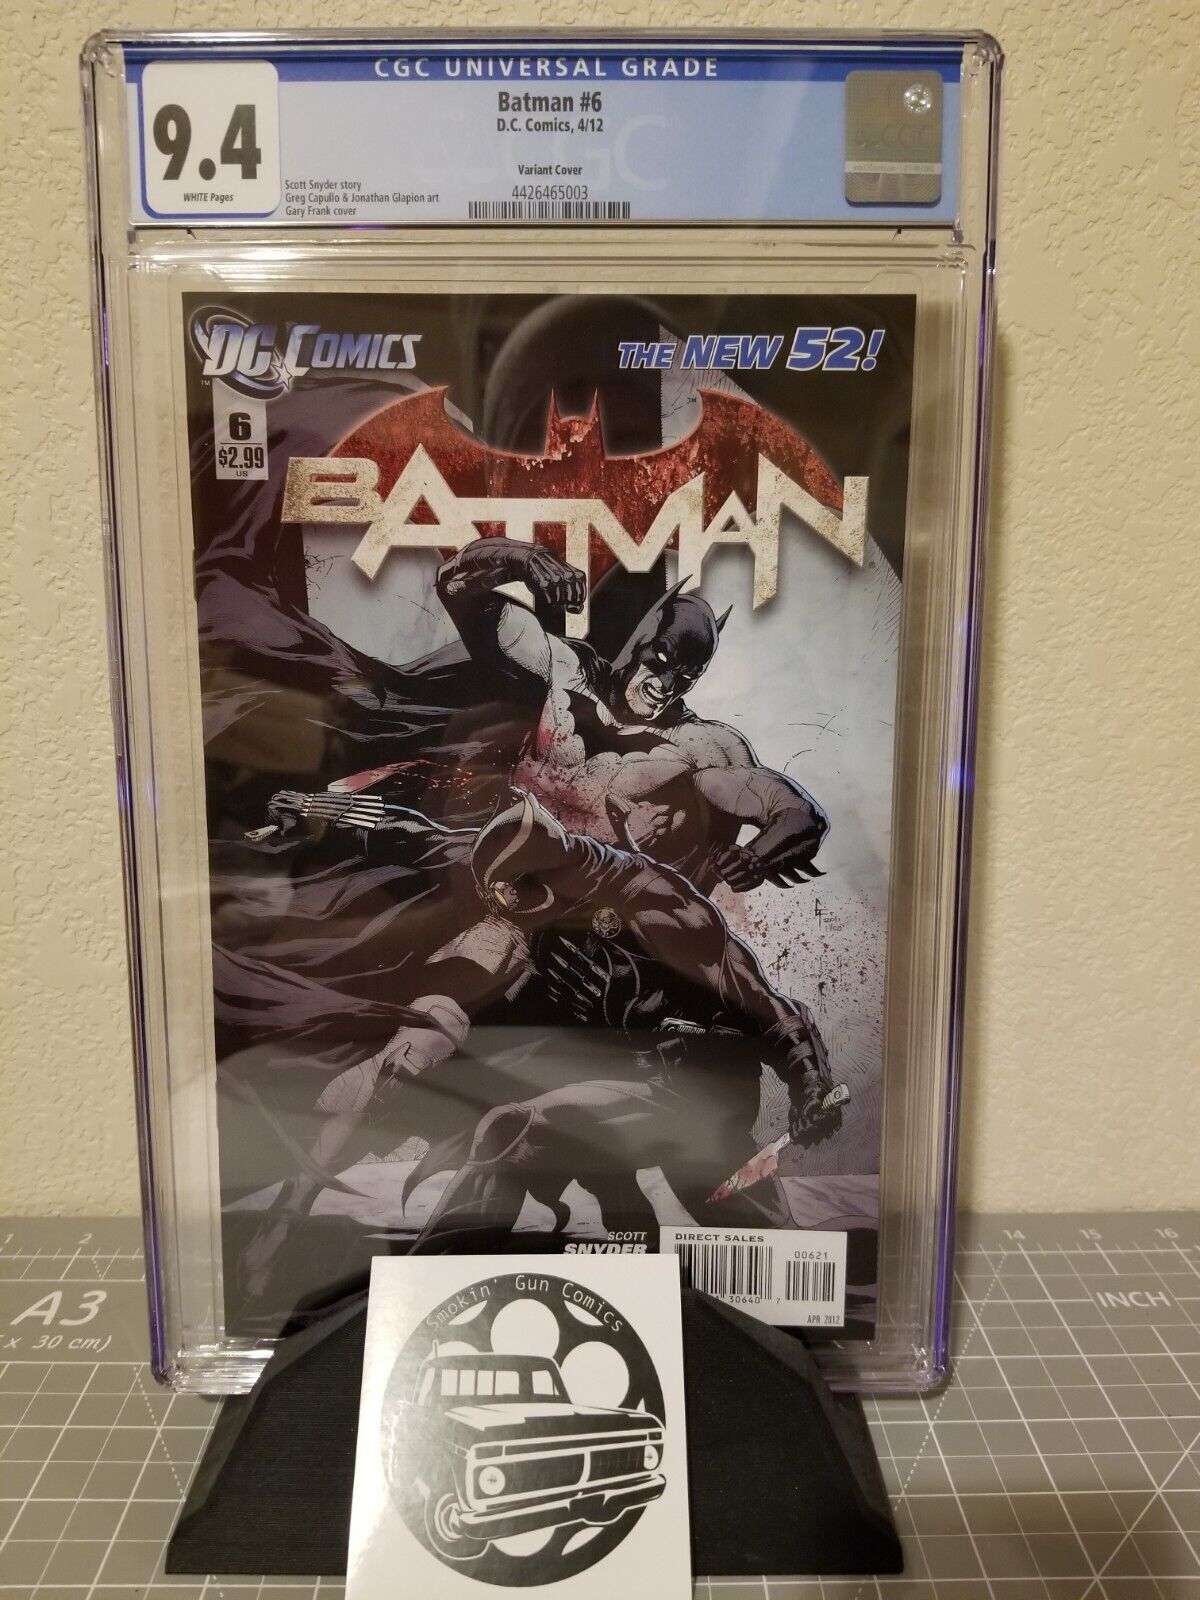 Batman #6 CGC 9.4  1:25 variant cover 1st Court of Owls New 52 Snyder